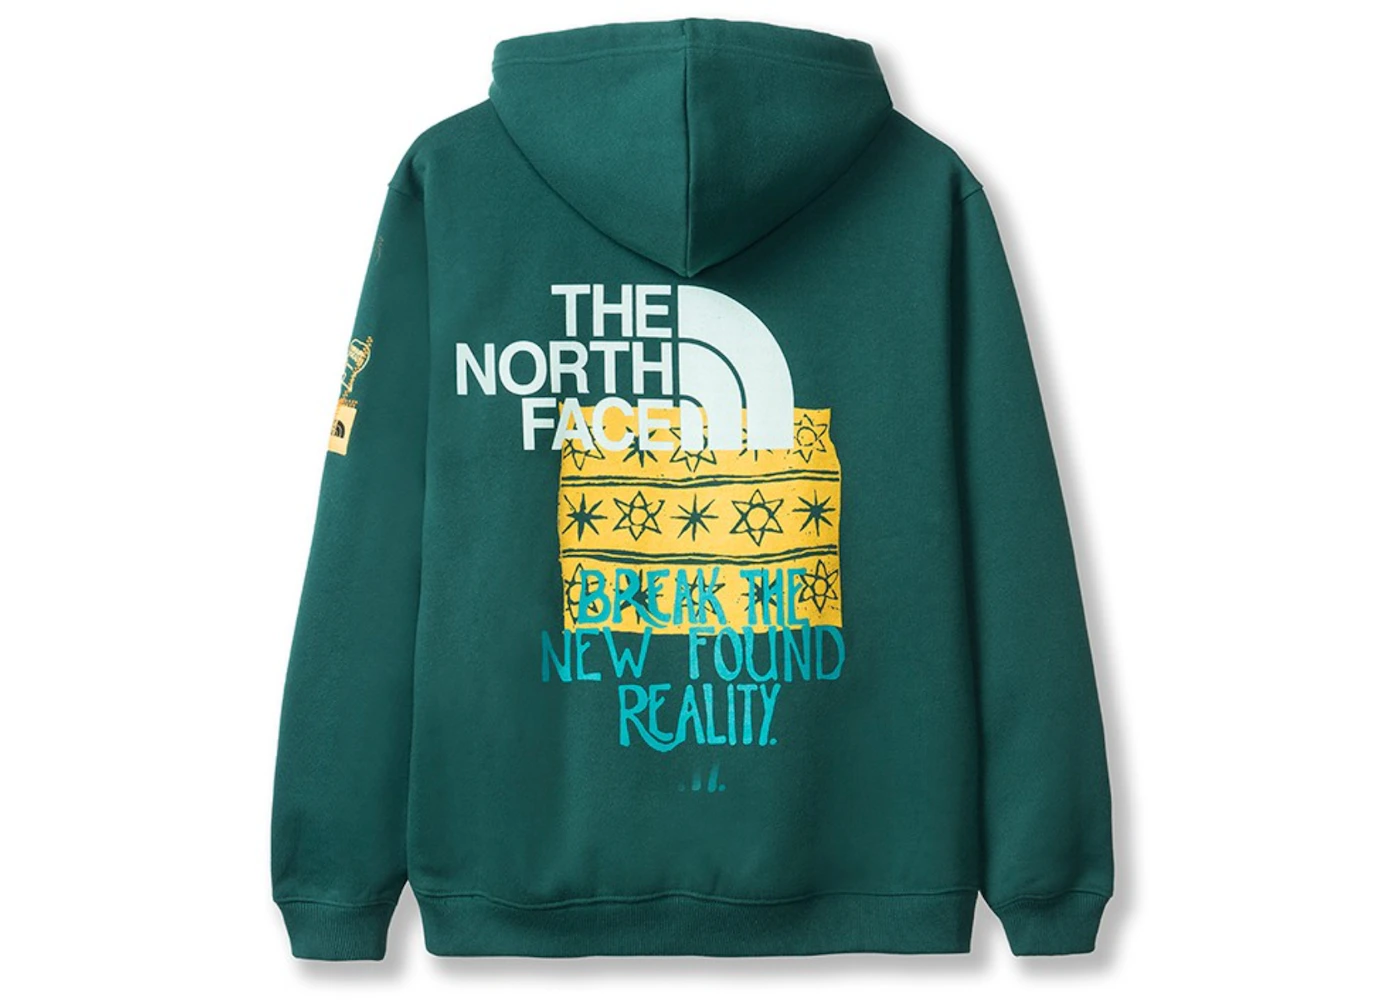 The North Face x Brain Dead Hoodie Green Men's - FW19 - US